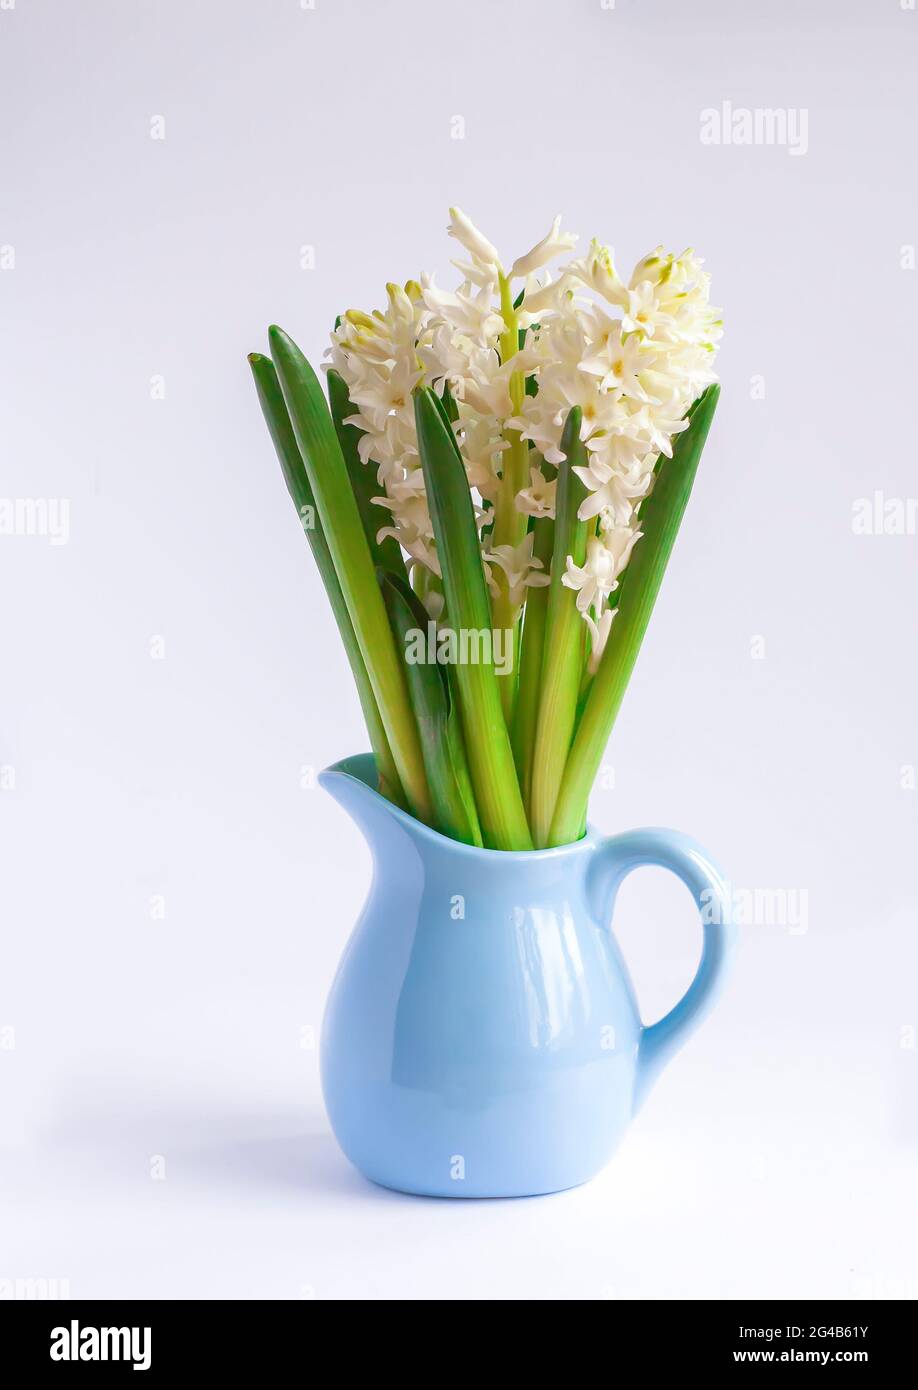 Spring white hyacinth flowers in a blue ceramics vase blooming at springtime. Stock Photo